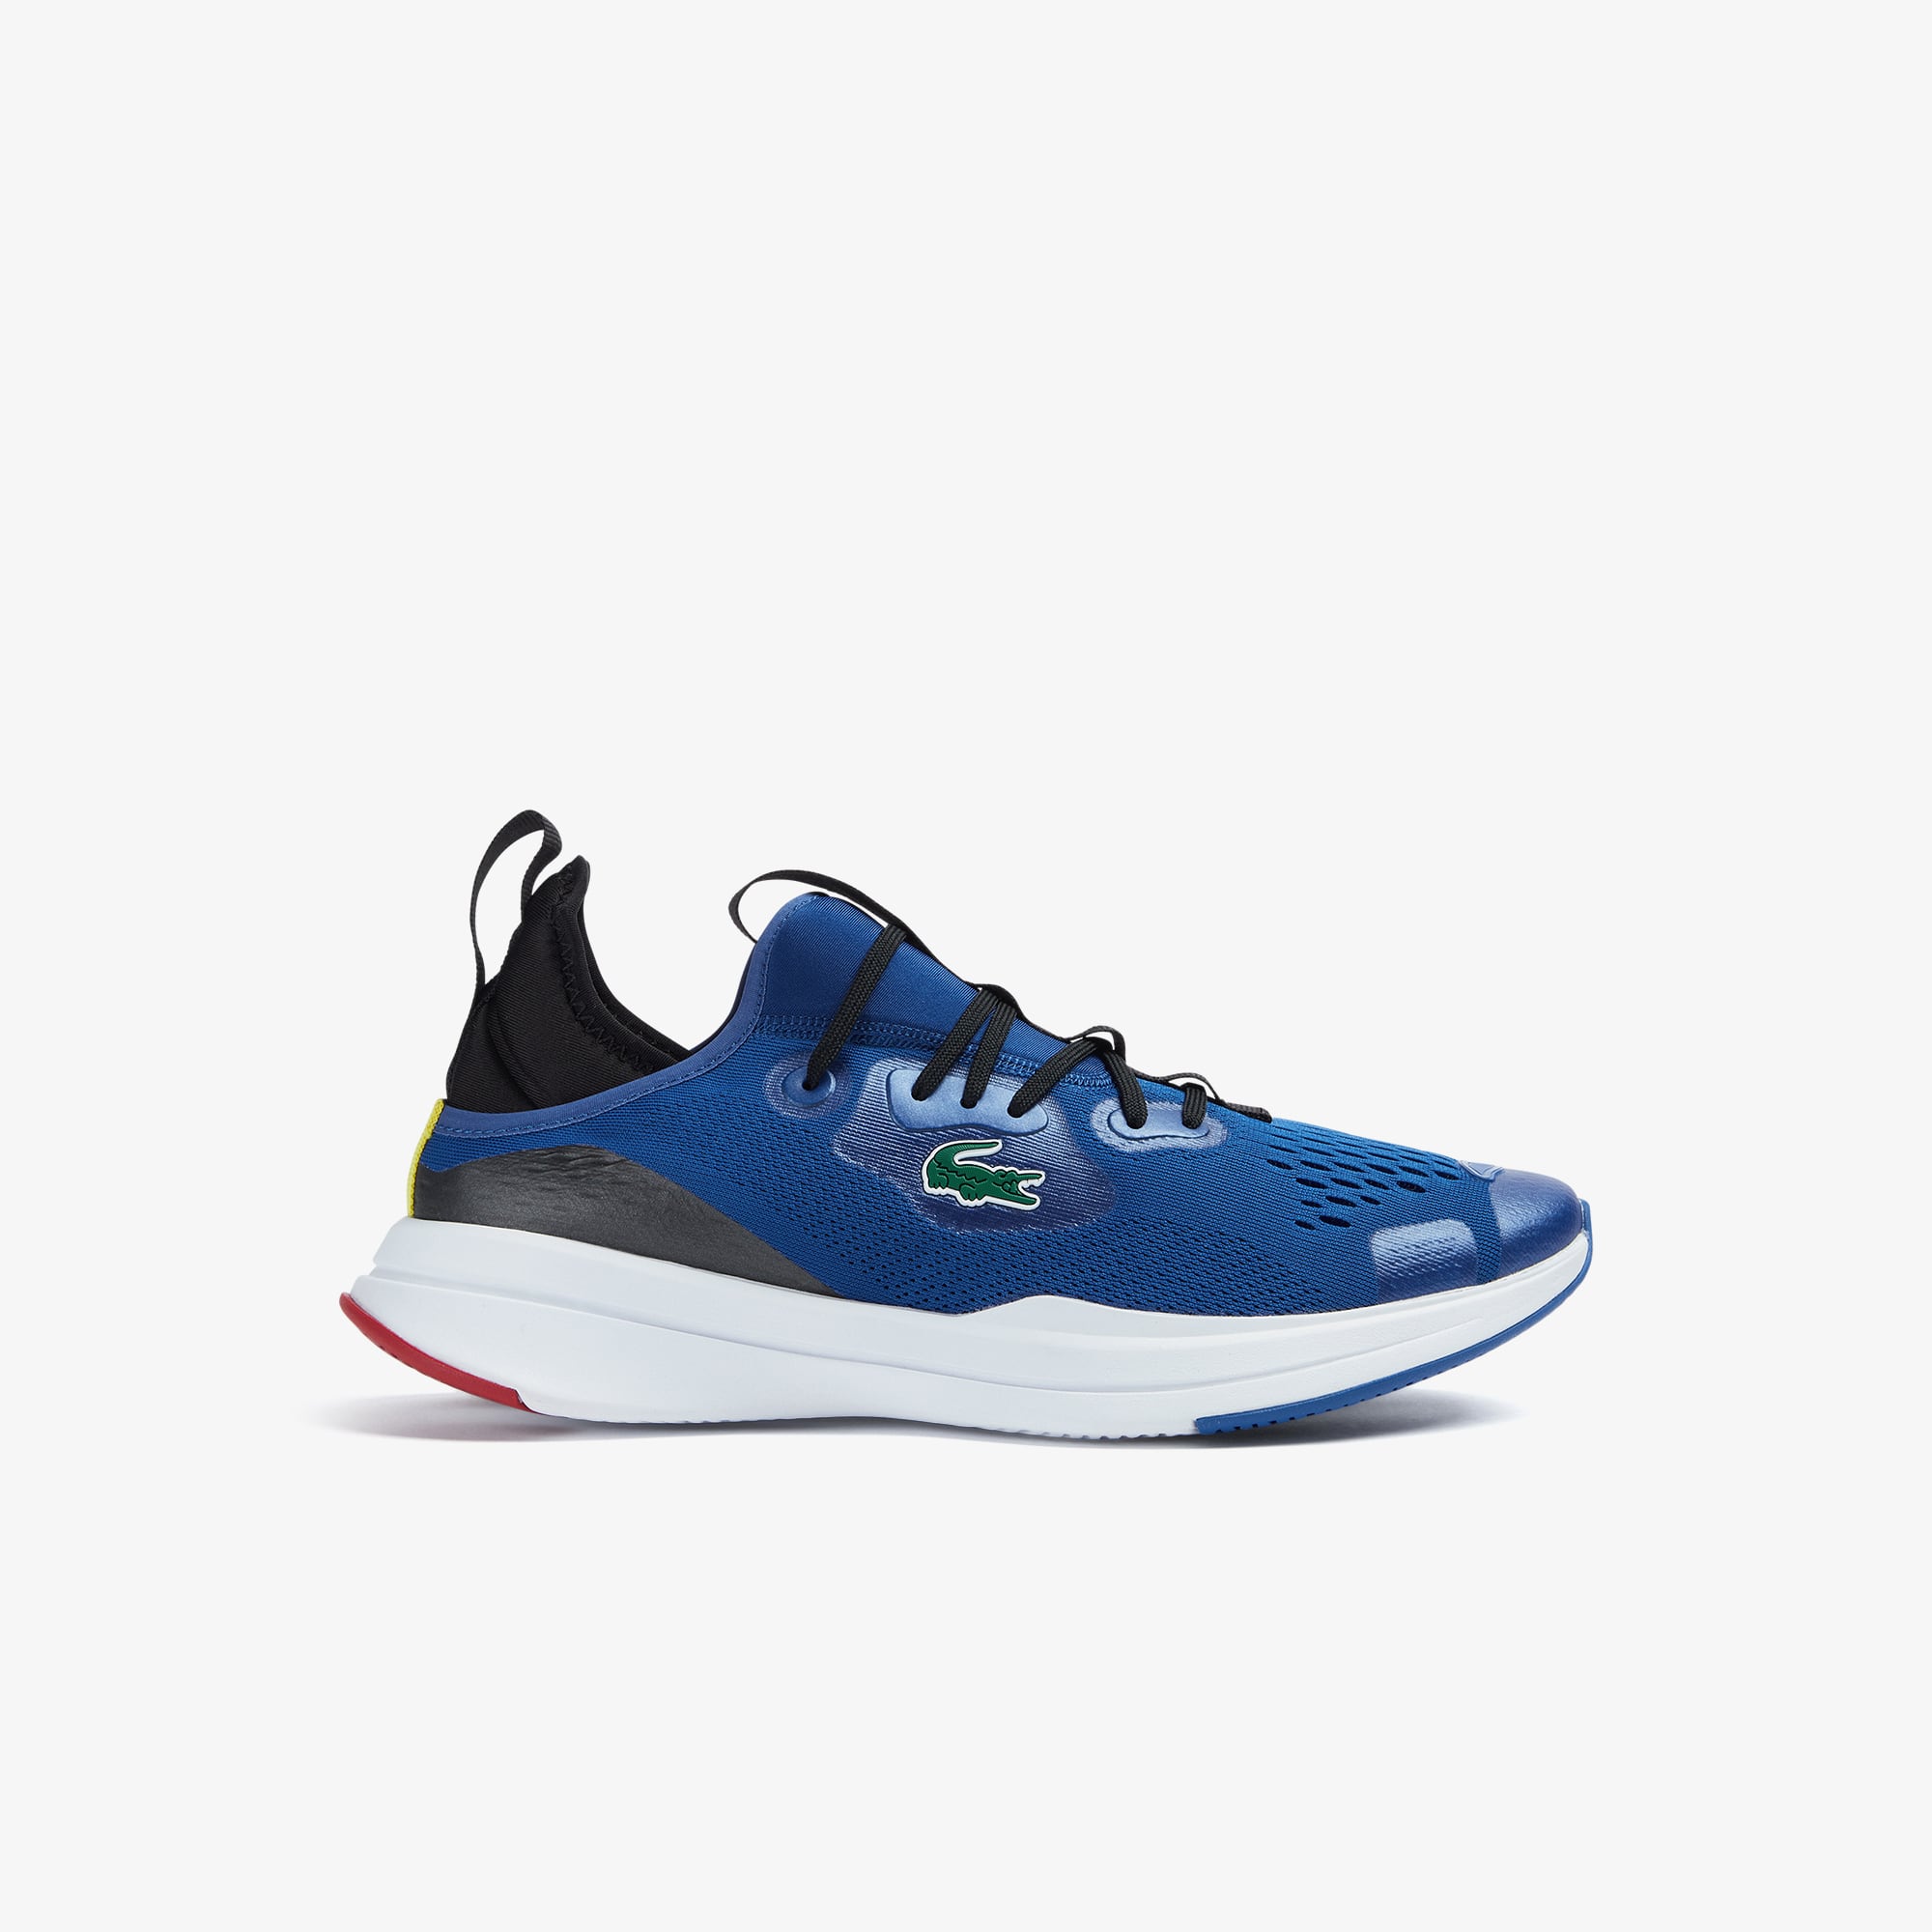 Mens Lacoste Run Spin Comfort Textile Color Contrast Sneakers